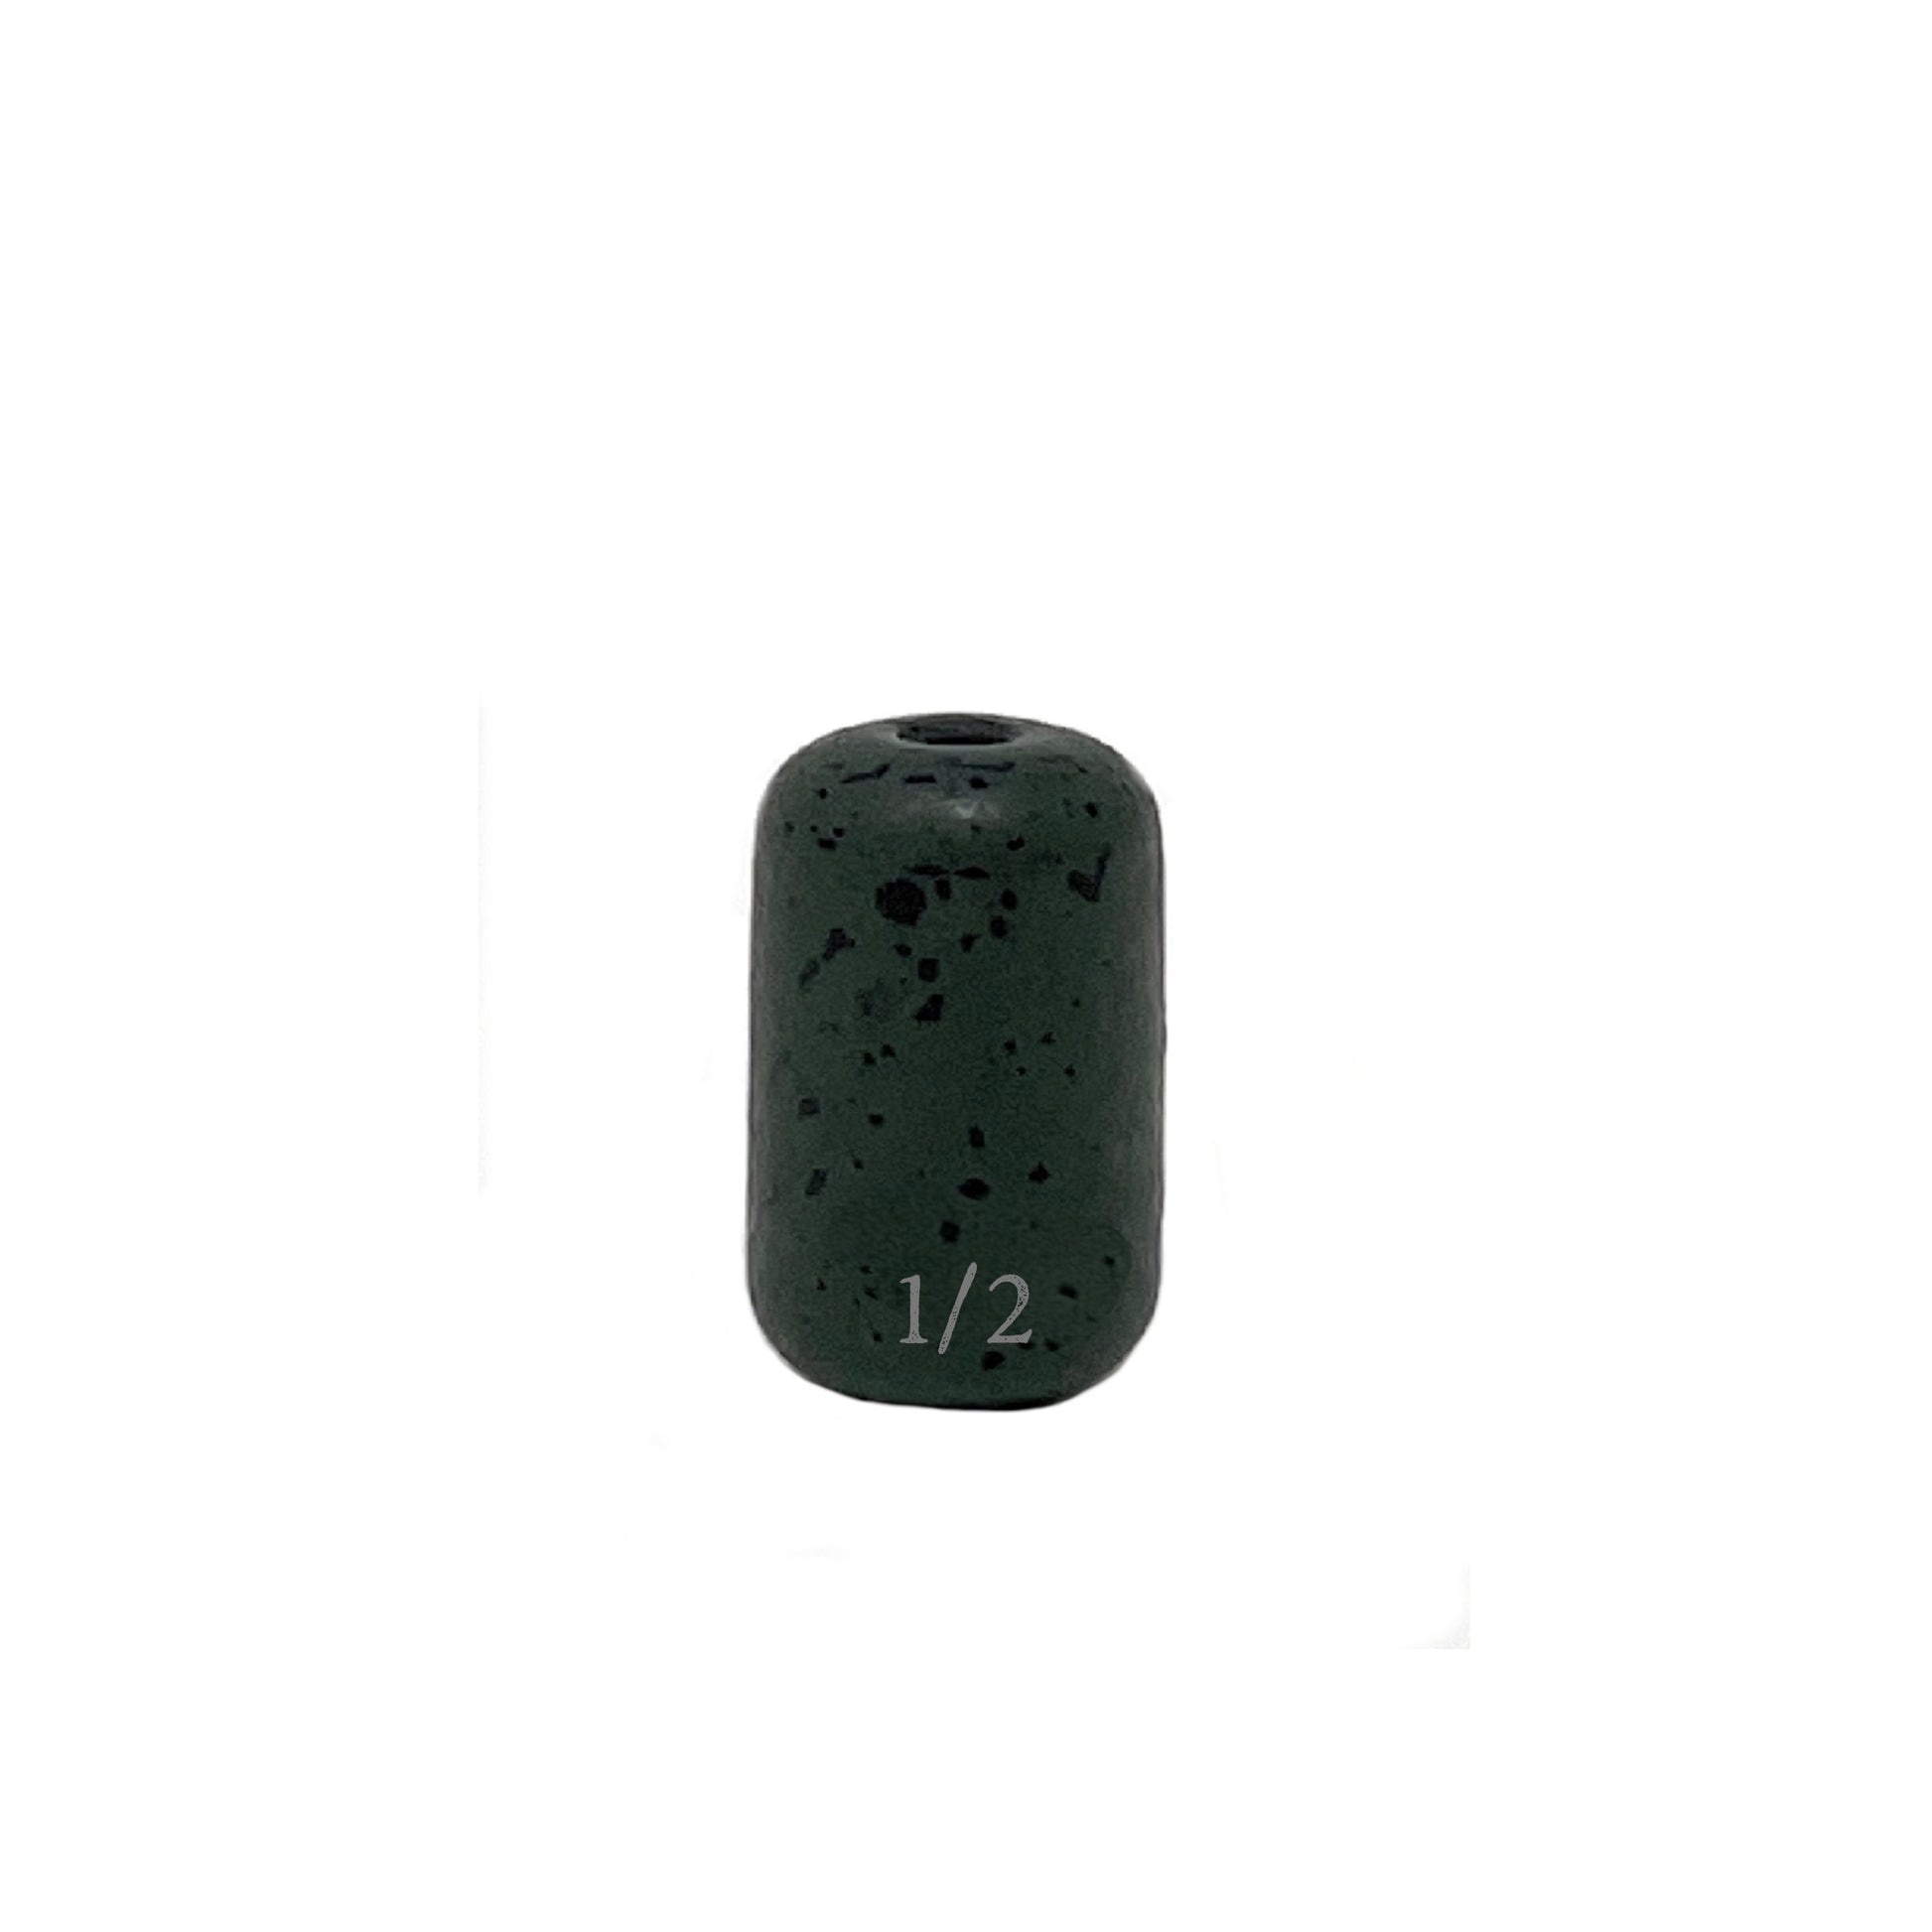 Reaction Tackle Tungsten Barrel Weights - 1/8 oz (8 per Pack)